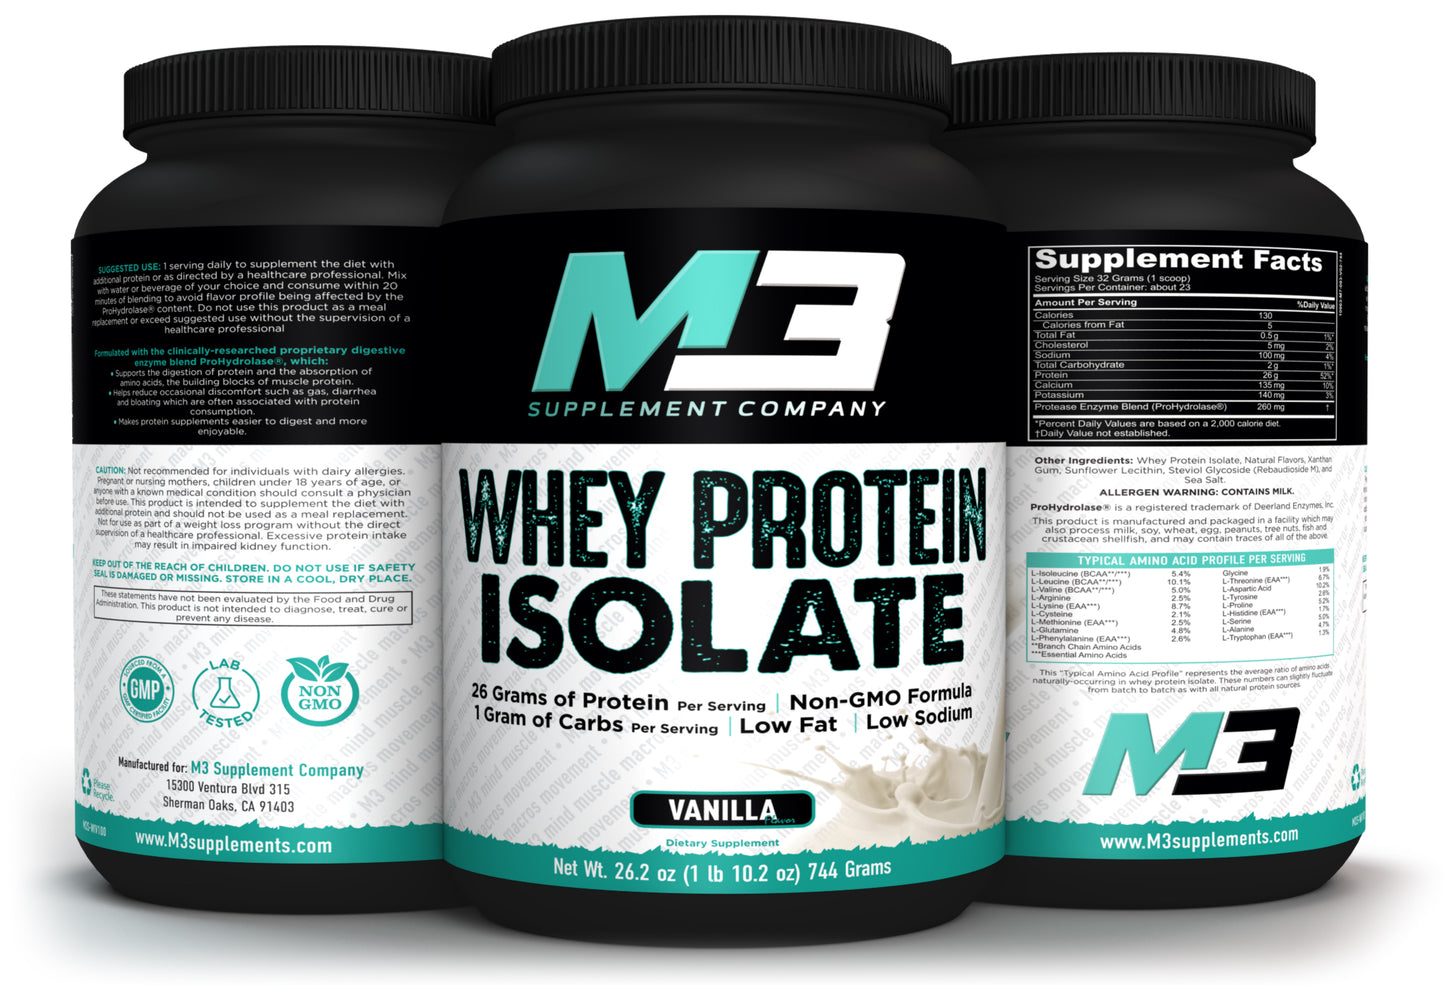 M3 Supplement Company brings you Whey Protein Isolate in Vanilla. With 26 grams of protein per serving, a Non-GMO formula, and 3 grams of carbs per serving. The protein is Low fat and low sodium. This Vanilla flavor is amazing.